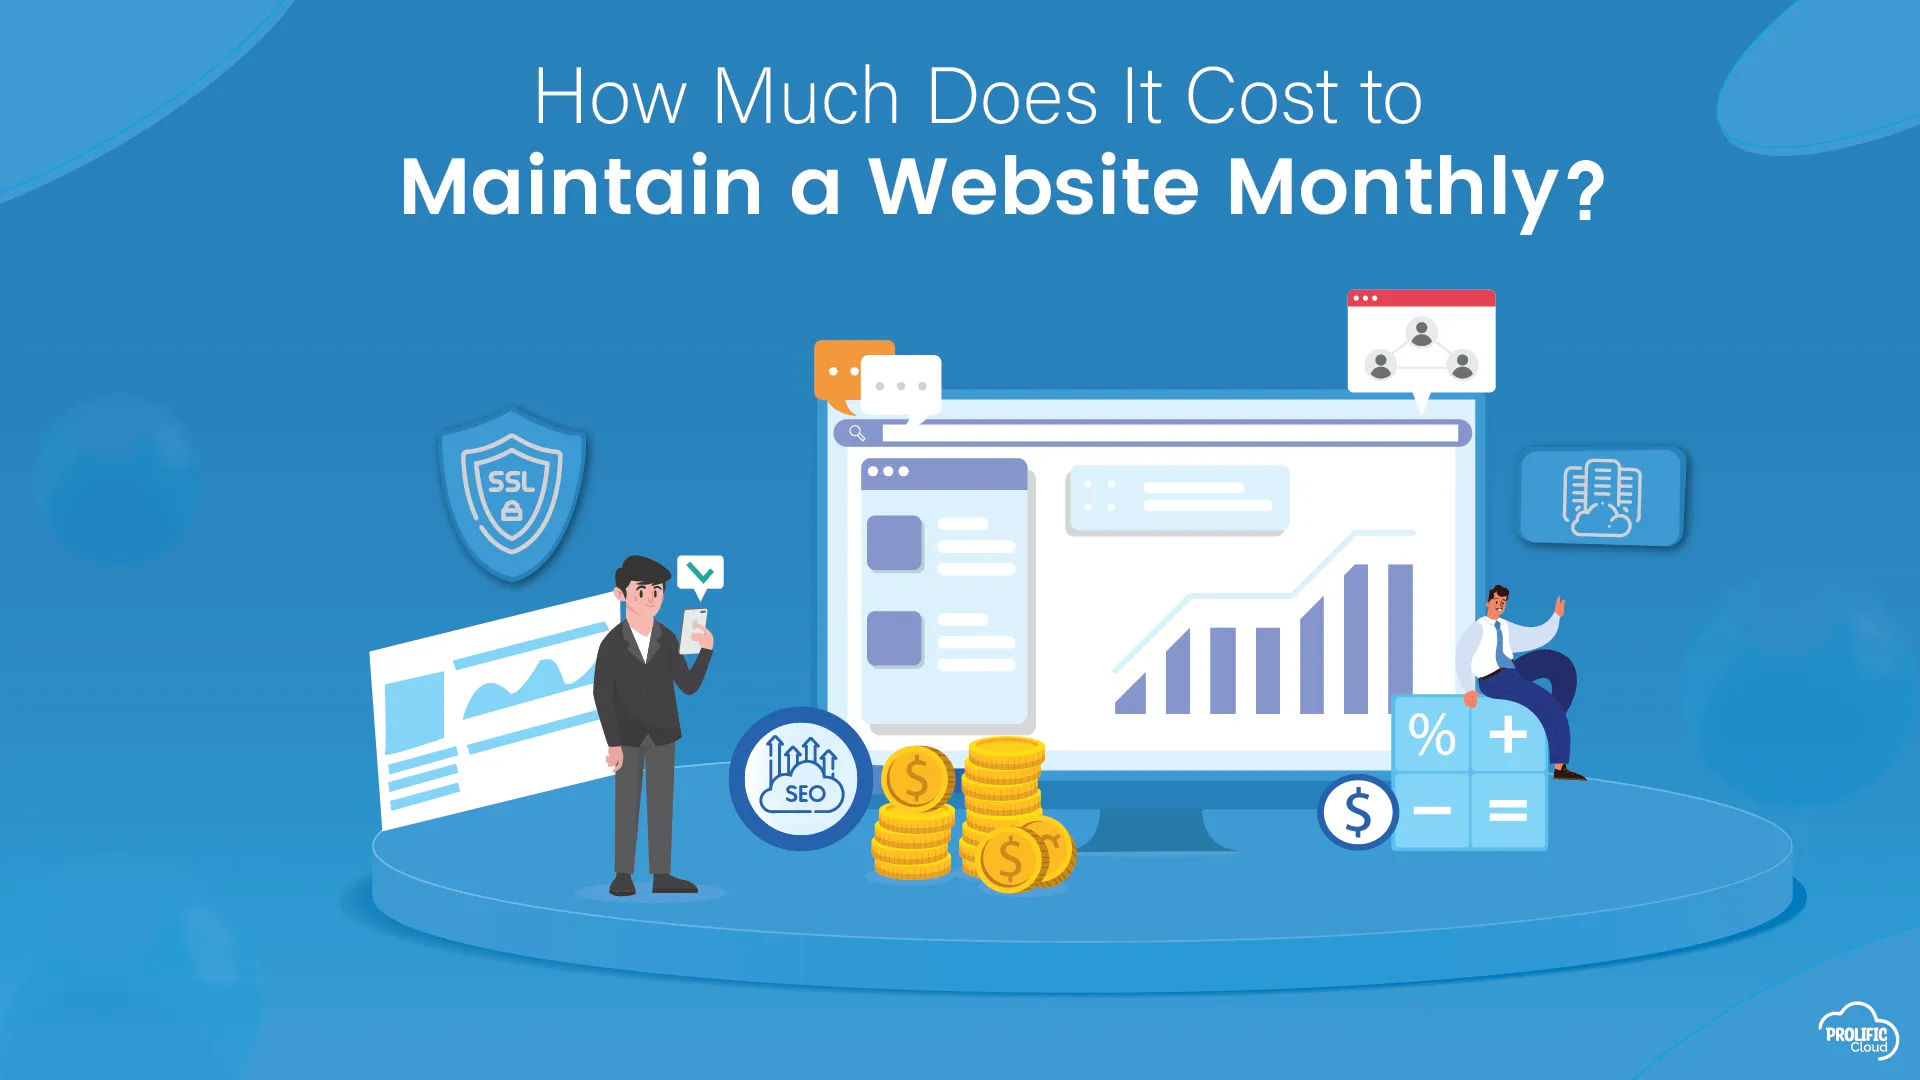 How Much Does It Cost to Maintain a Website Monthly